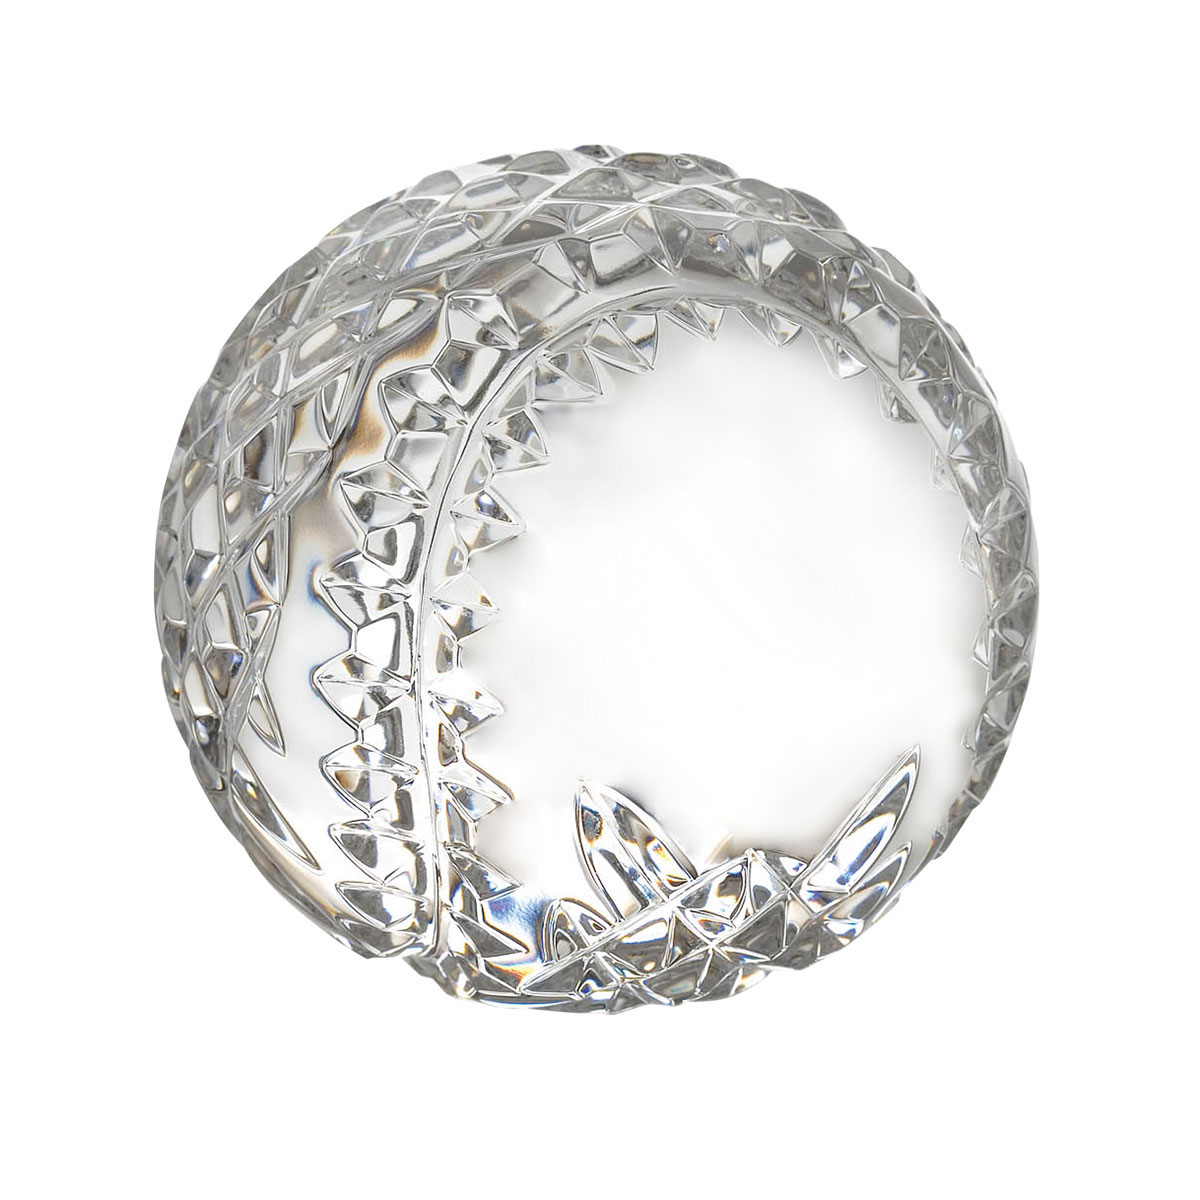 Waterford Crystal Blank Panel Baseball Paperweight